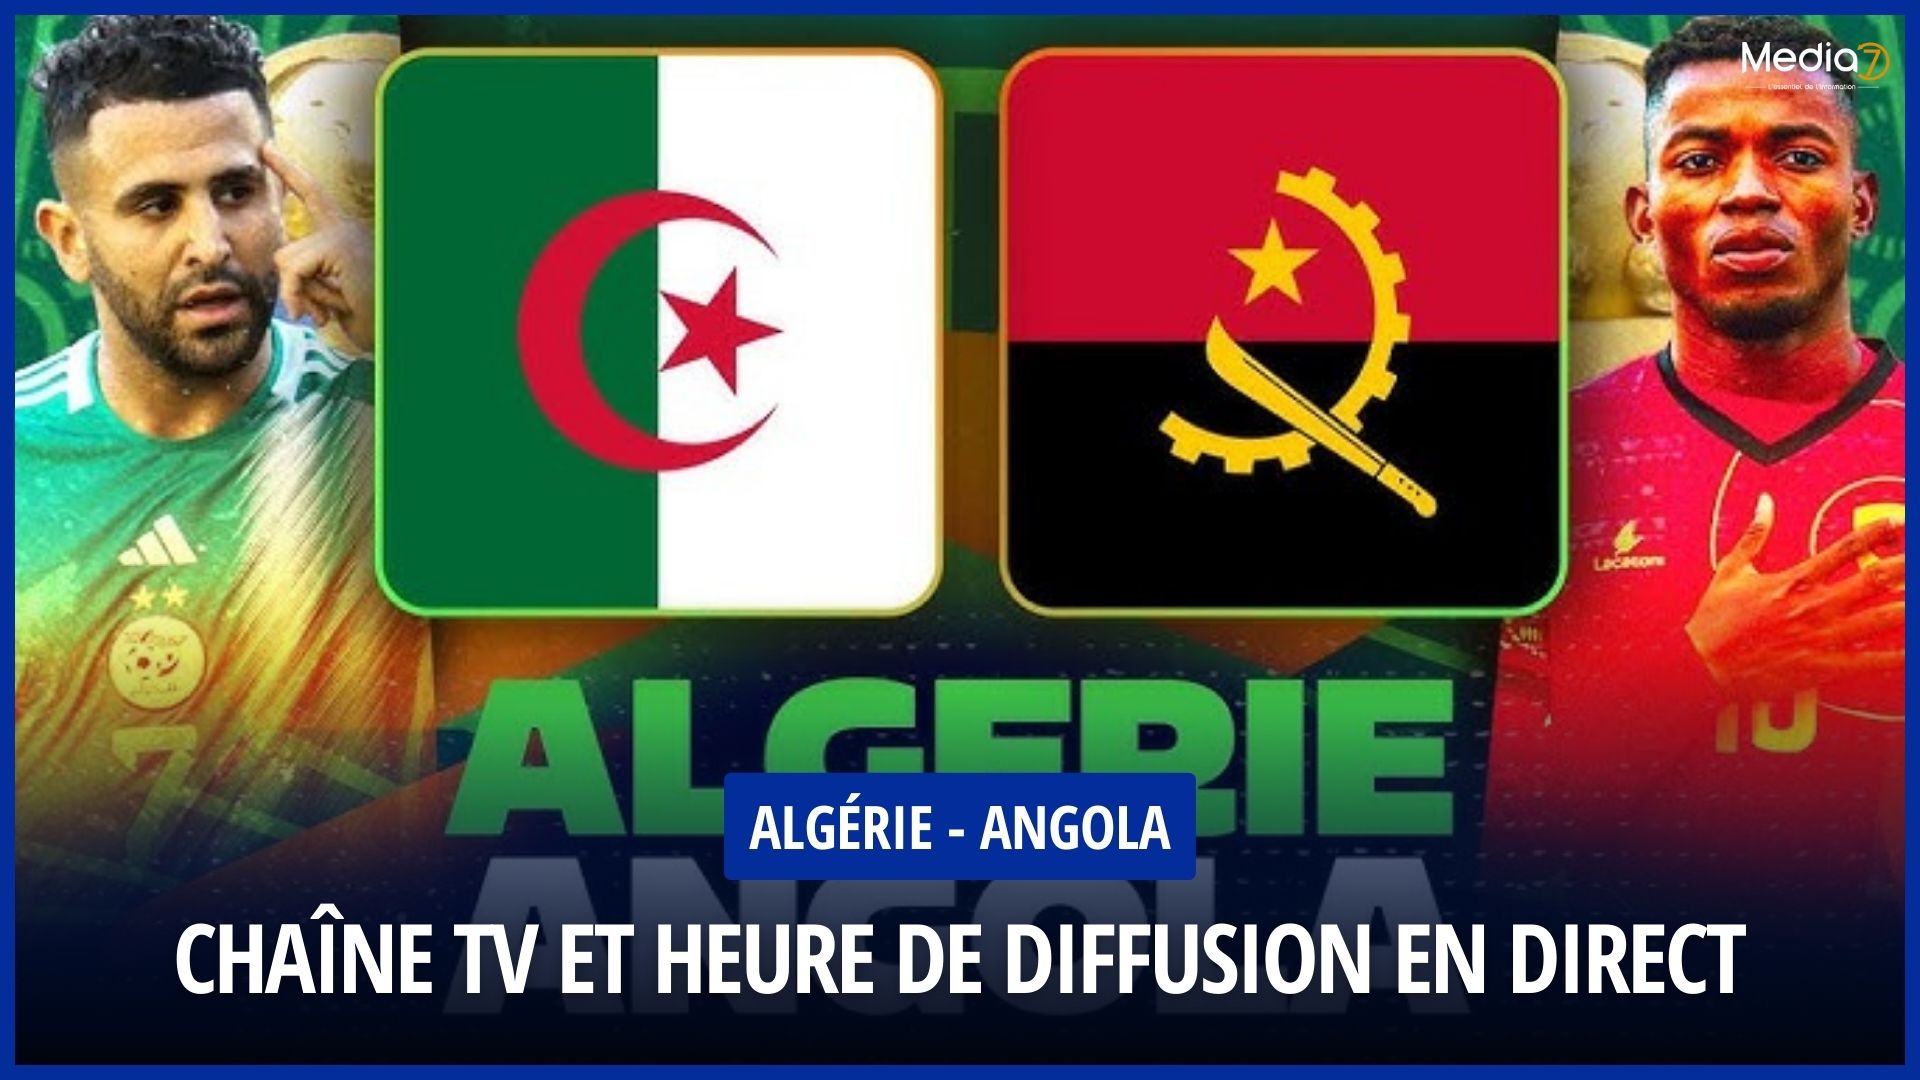 Algeria - Angola Match: TV Channel and Live Broadcast Time - Media7